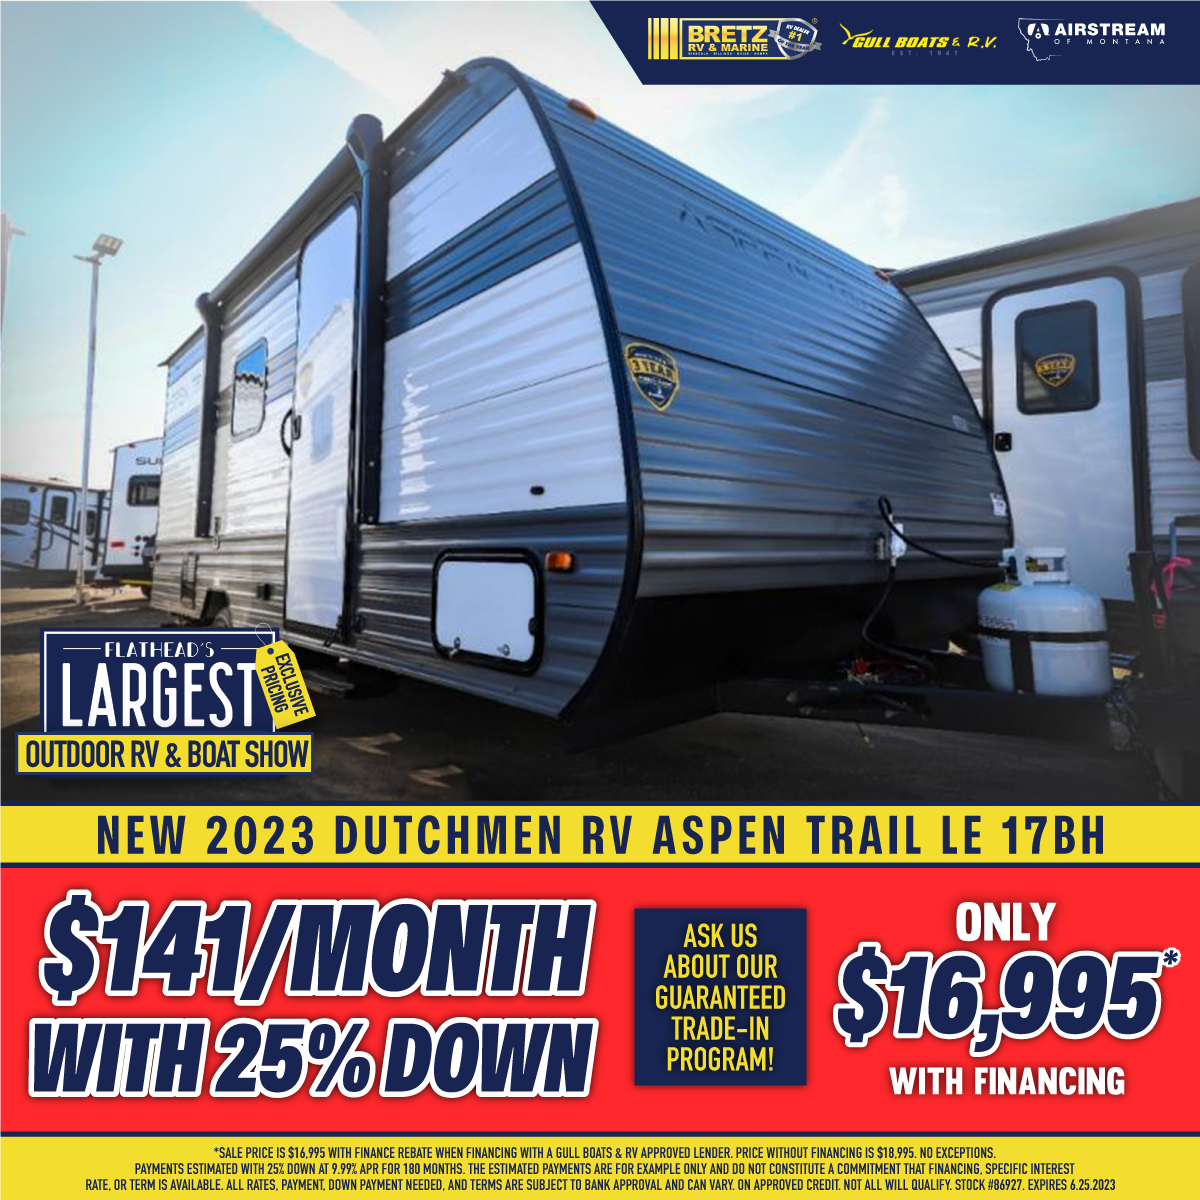 Travel Trailers starting at $16,995* with financing